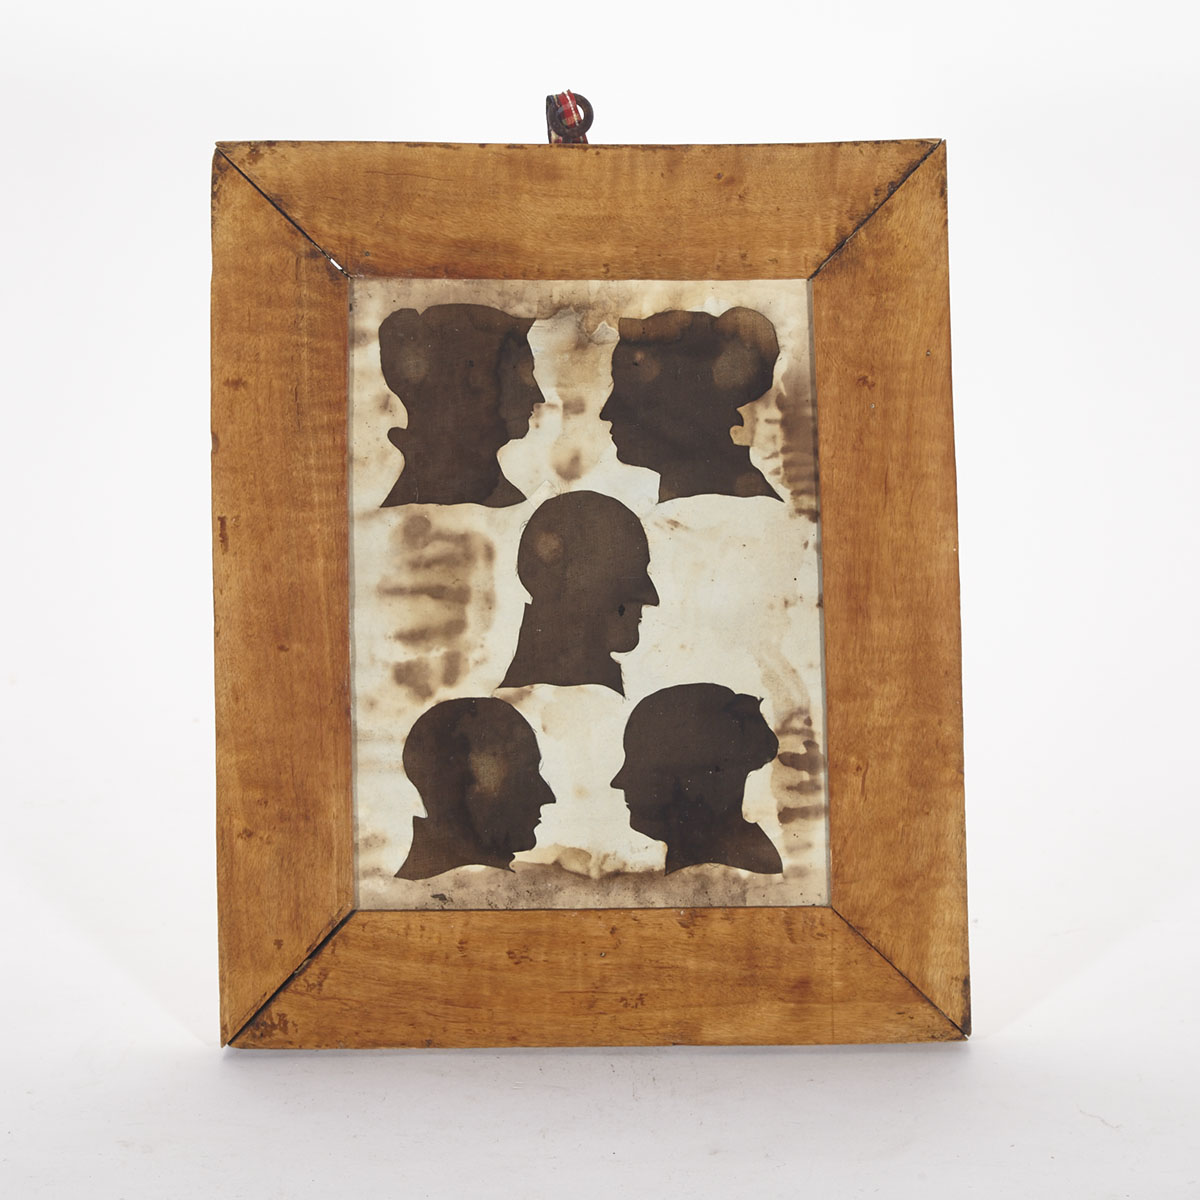 Linen Backed Paper Cutout Silhouettes of a Family Group, mid 19th century